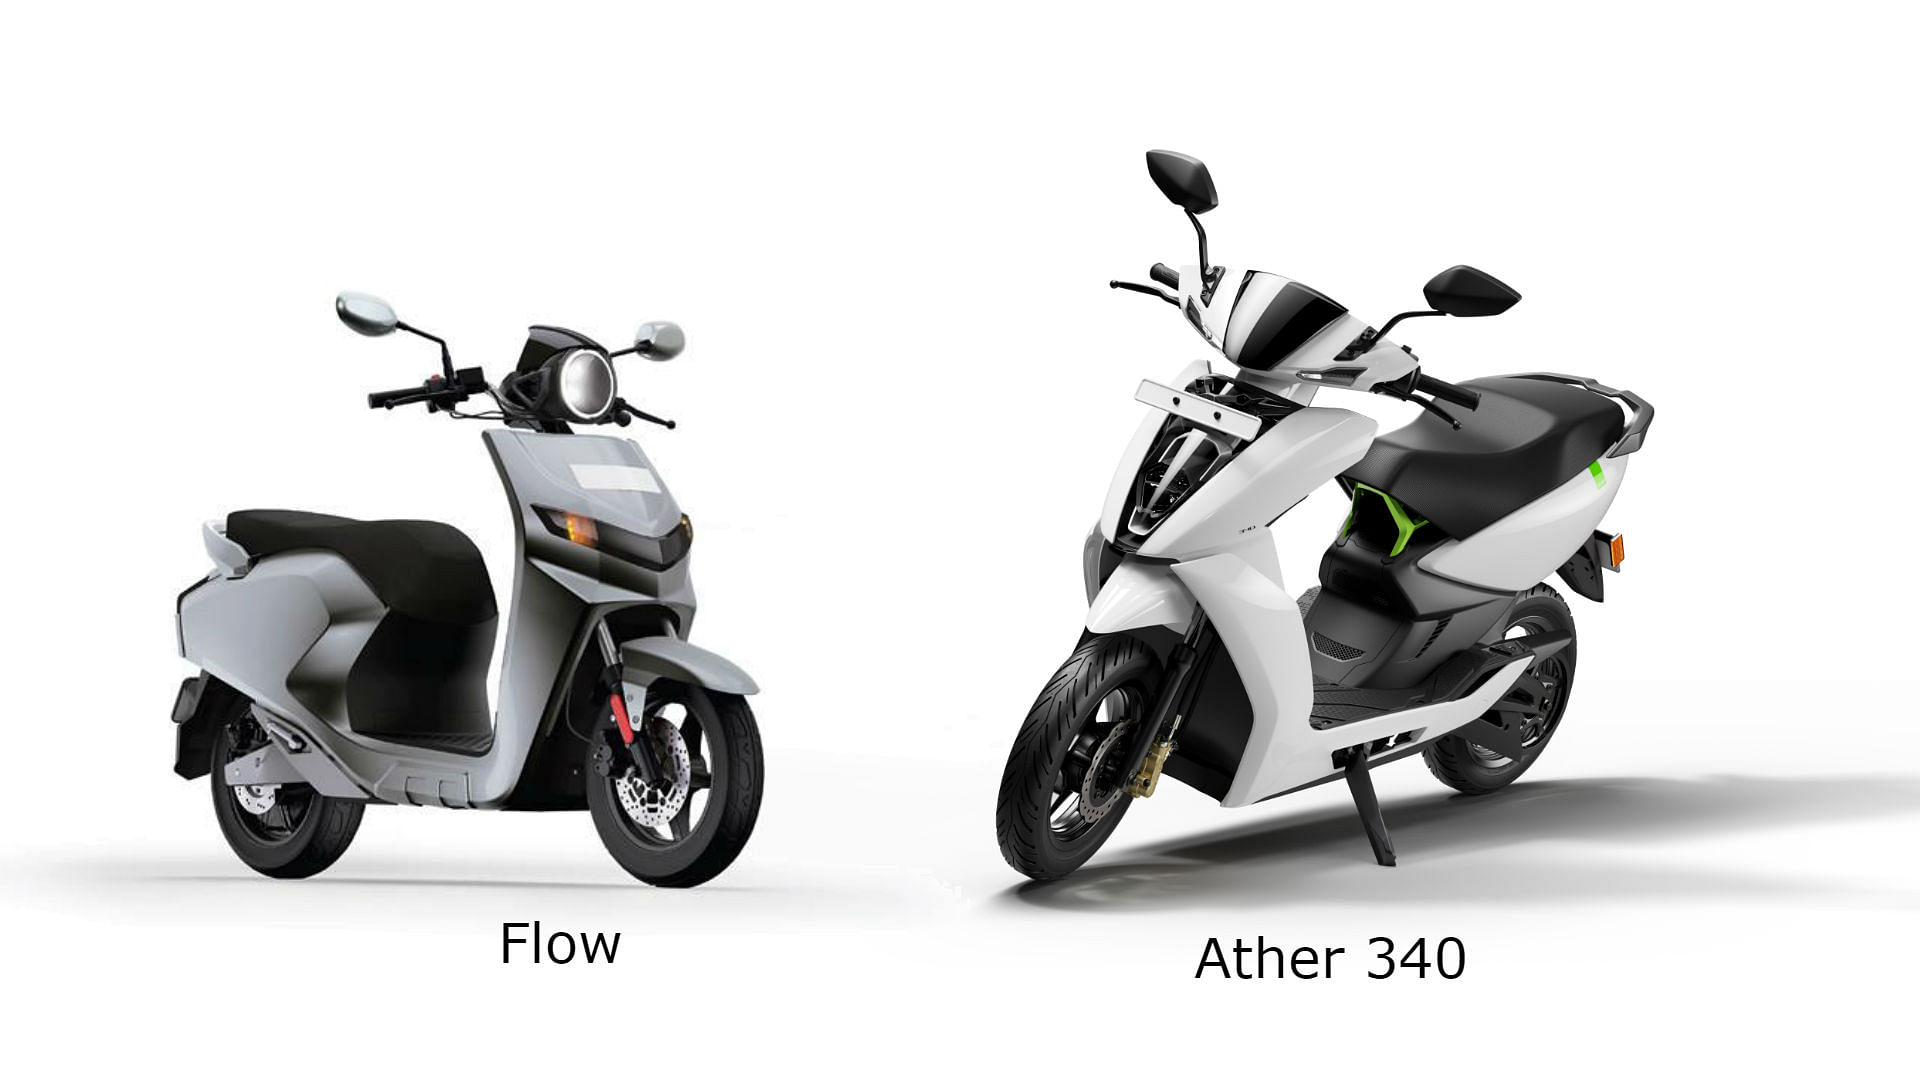 Flow scooter (left) and Ather 340 (right) compared.&nbsp;